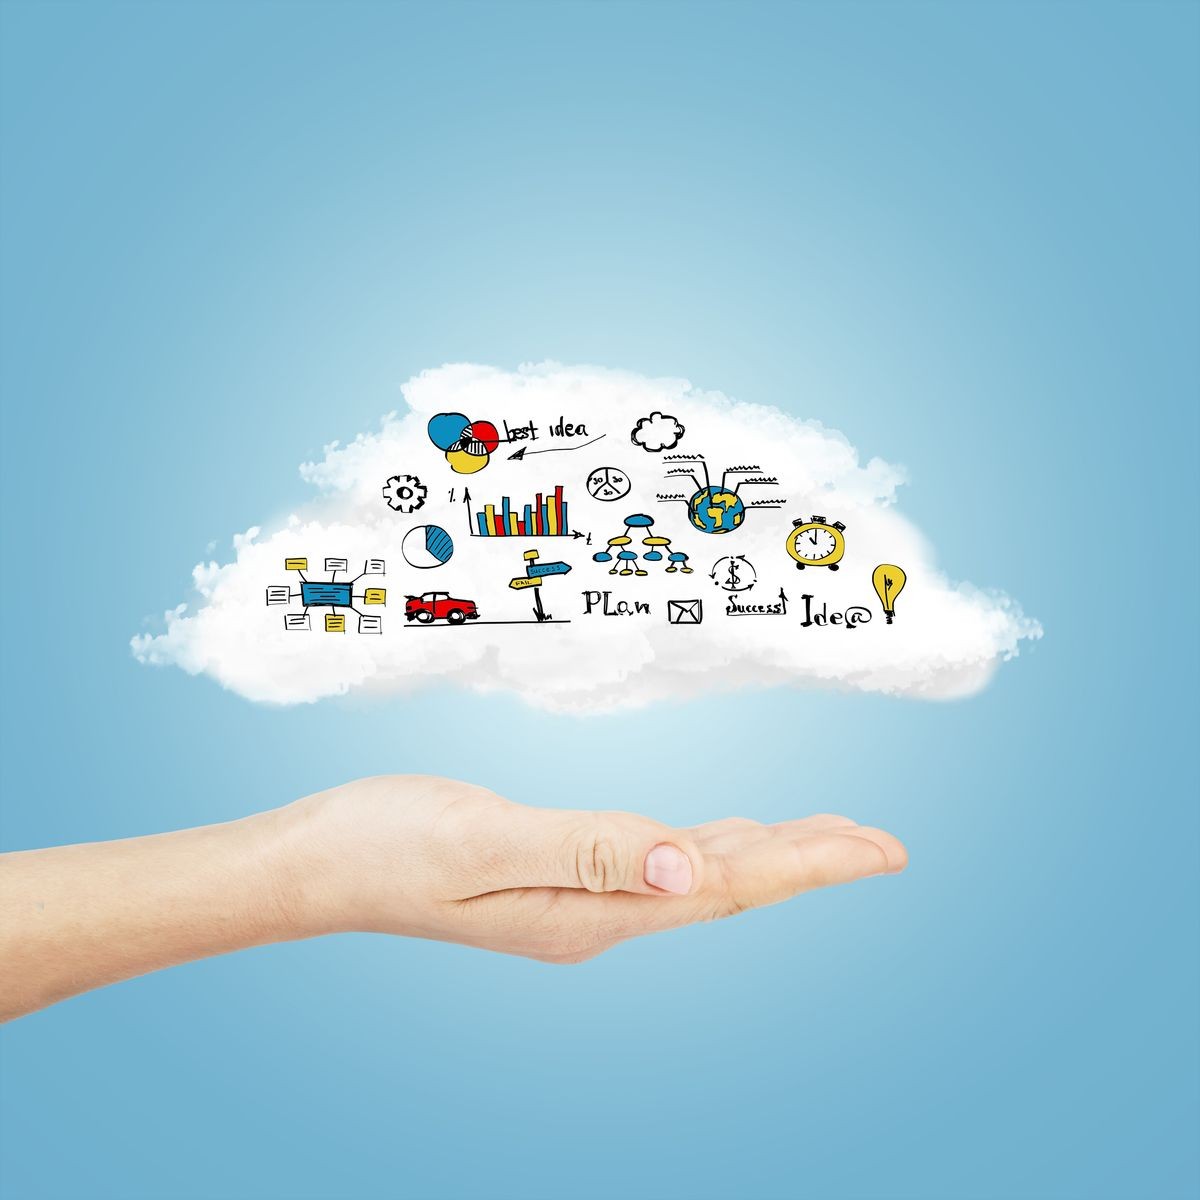 Cloud with different business sketches in hand. Internet concept image